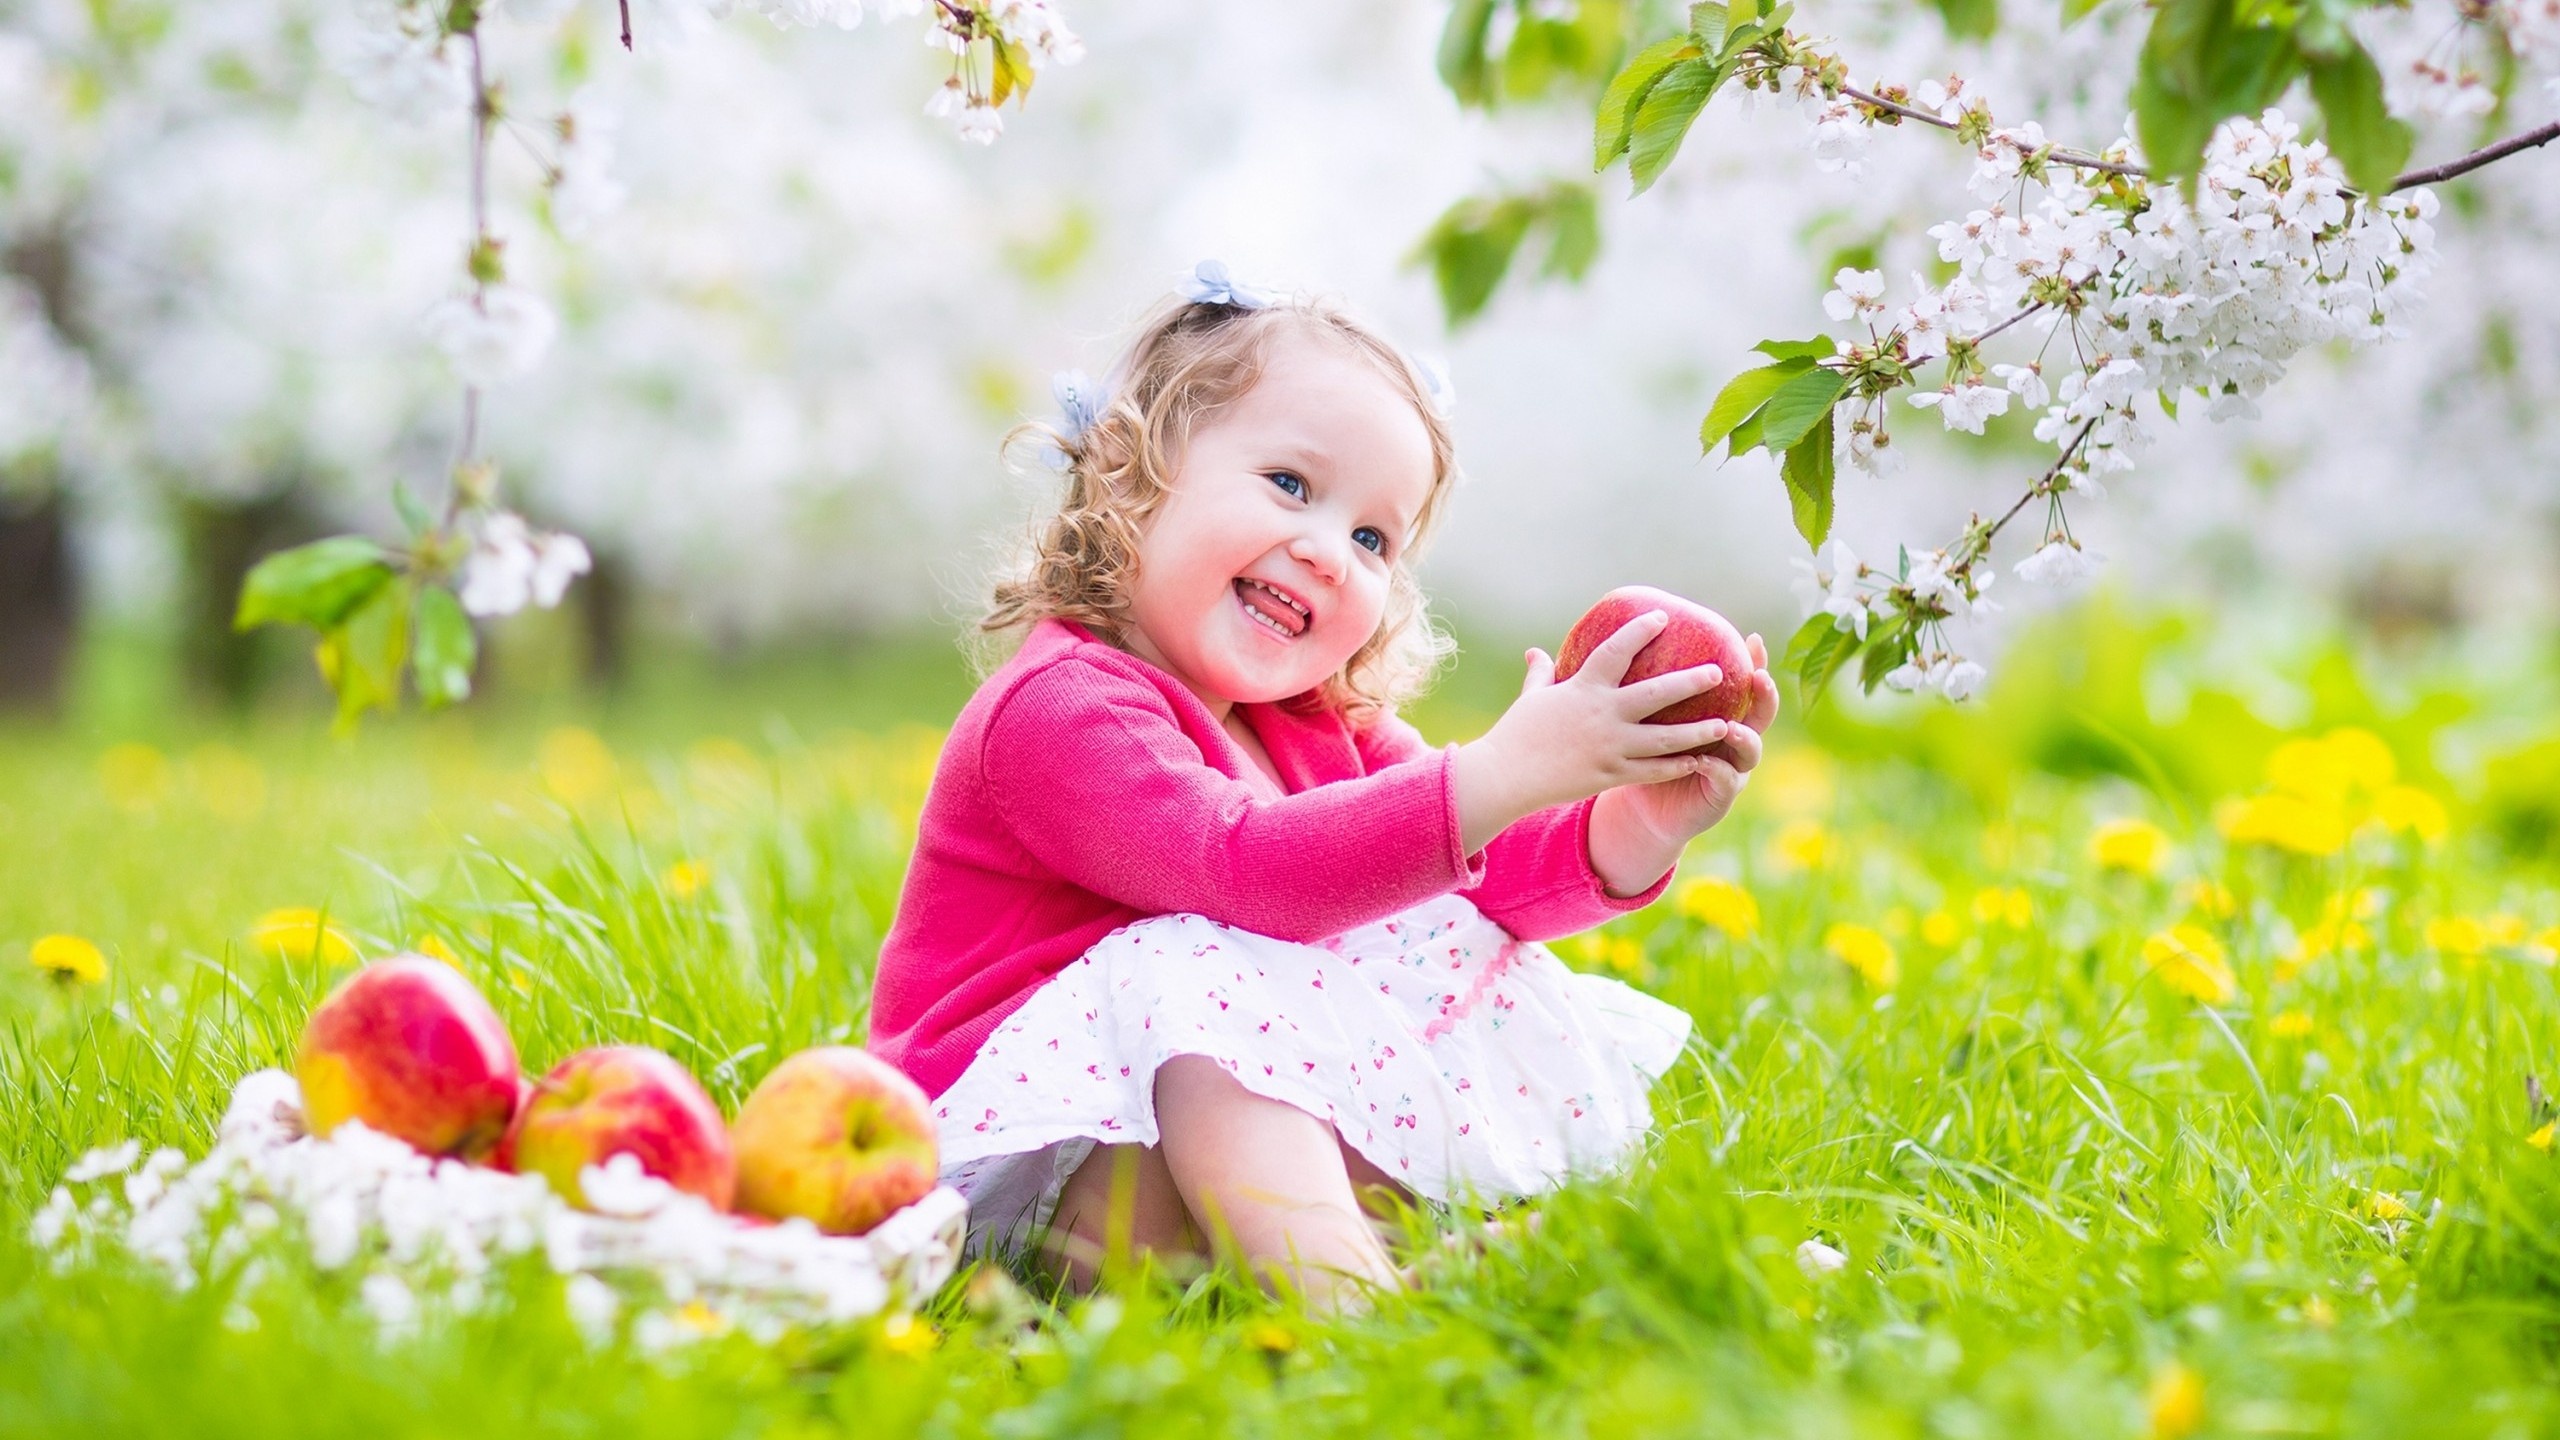 Happy Toddler Girl With Flower Crown Wallpapers - 2560x1440 - 830041